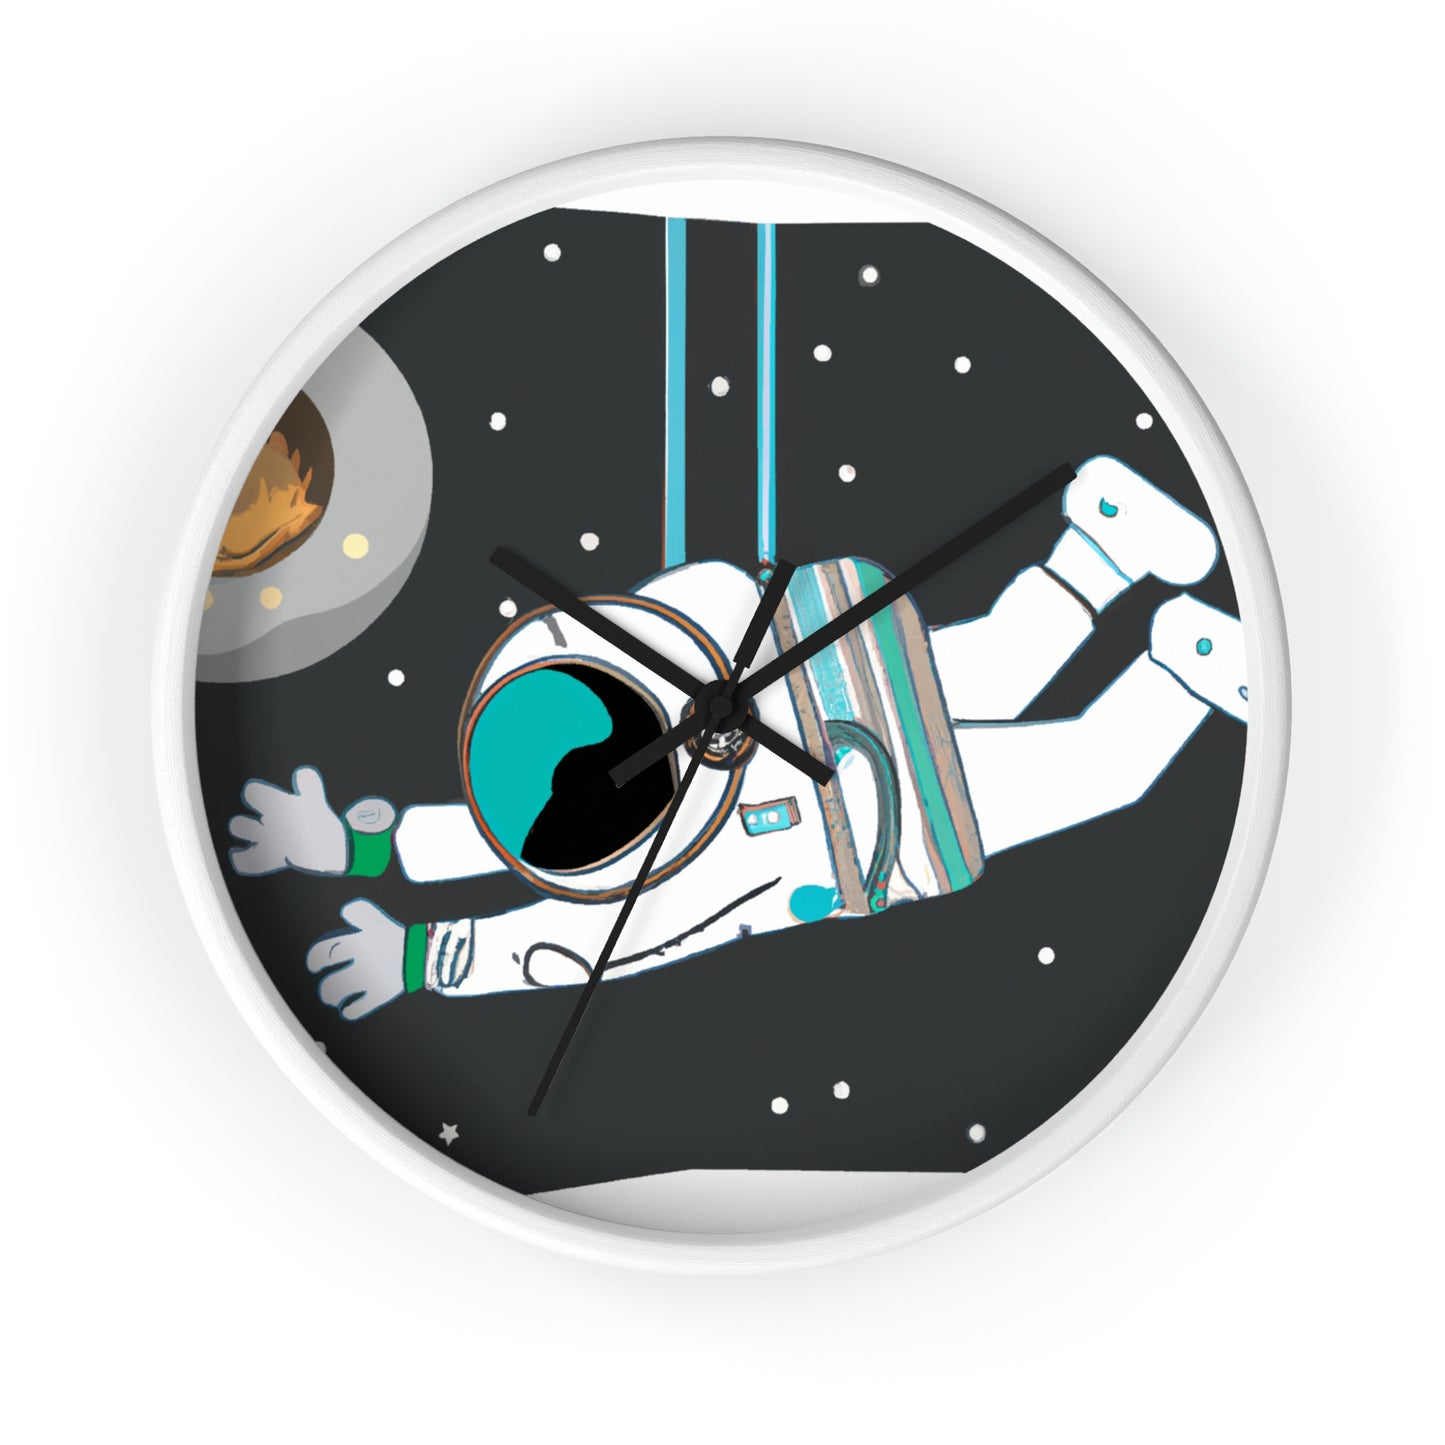 "Mission: Comet Rescue" - The Alien Wall Clock